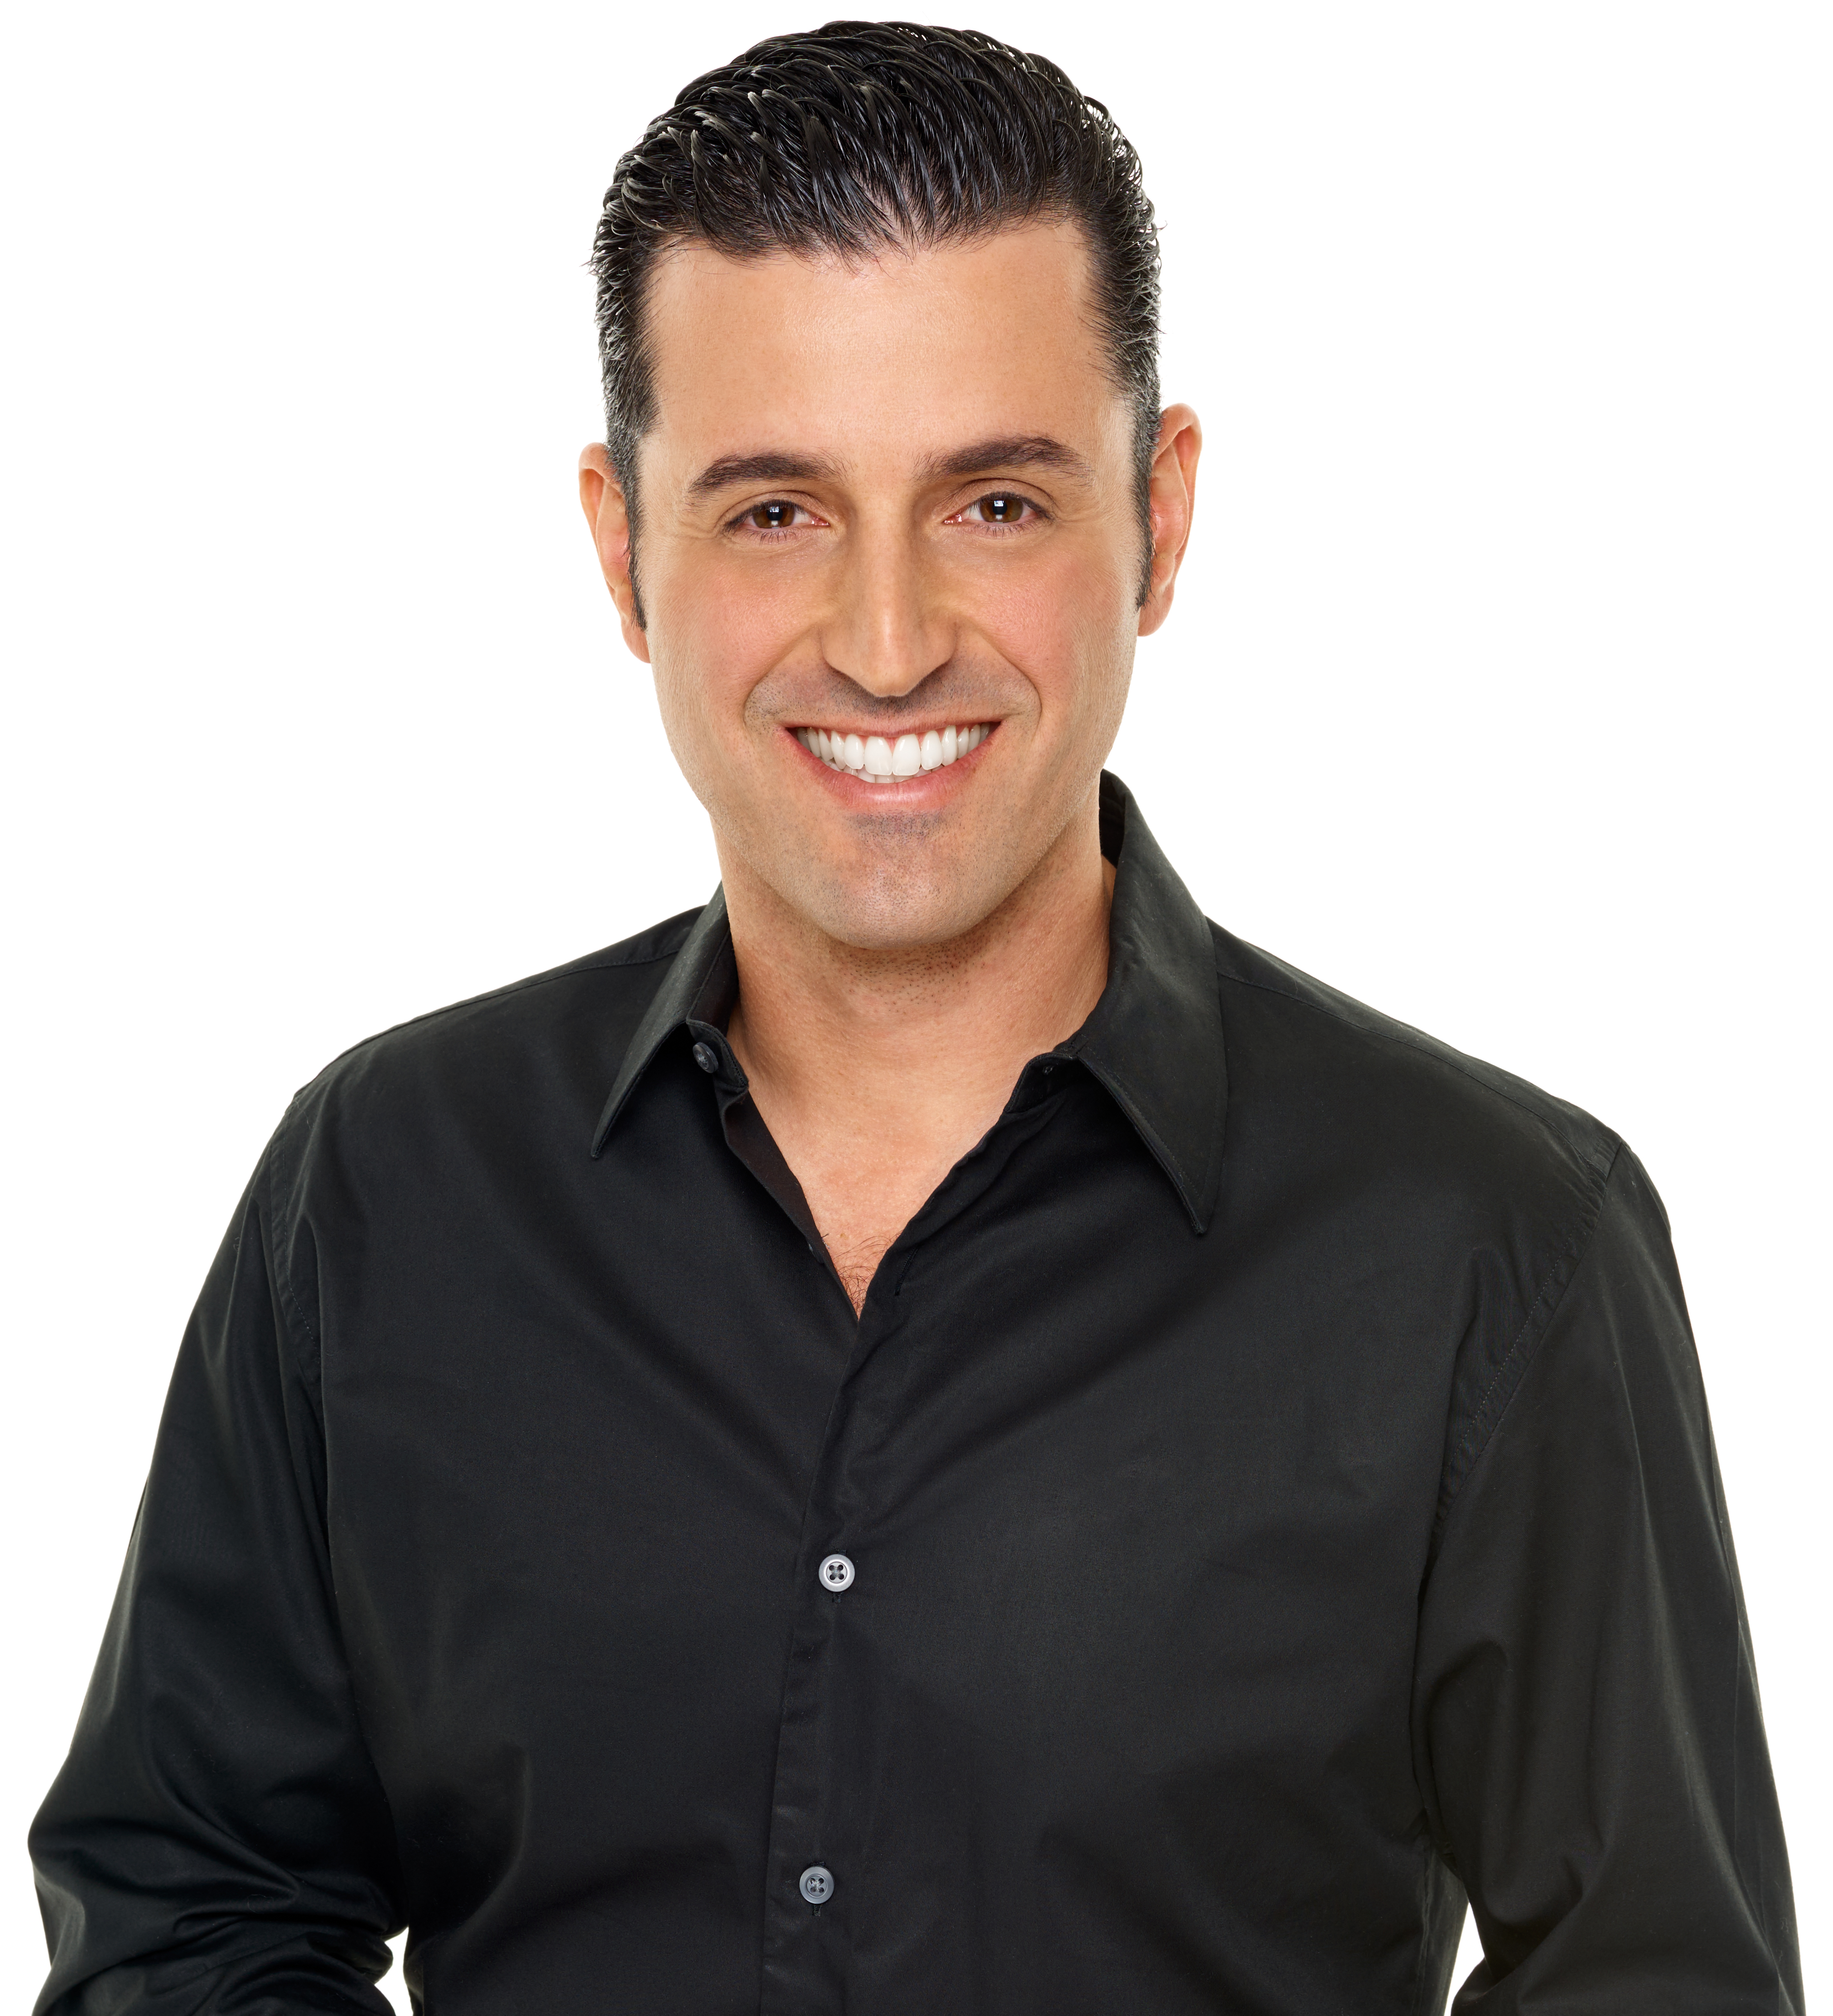 Interview with Yigal Adato, Entrepreneur, Leadership Expert and Founder of the Legion of Leaders